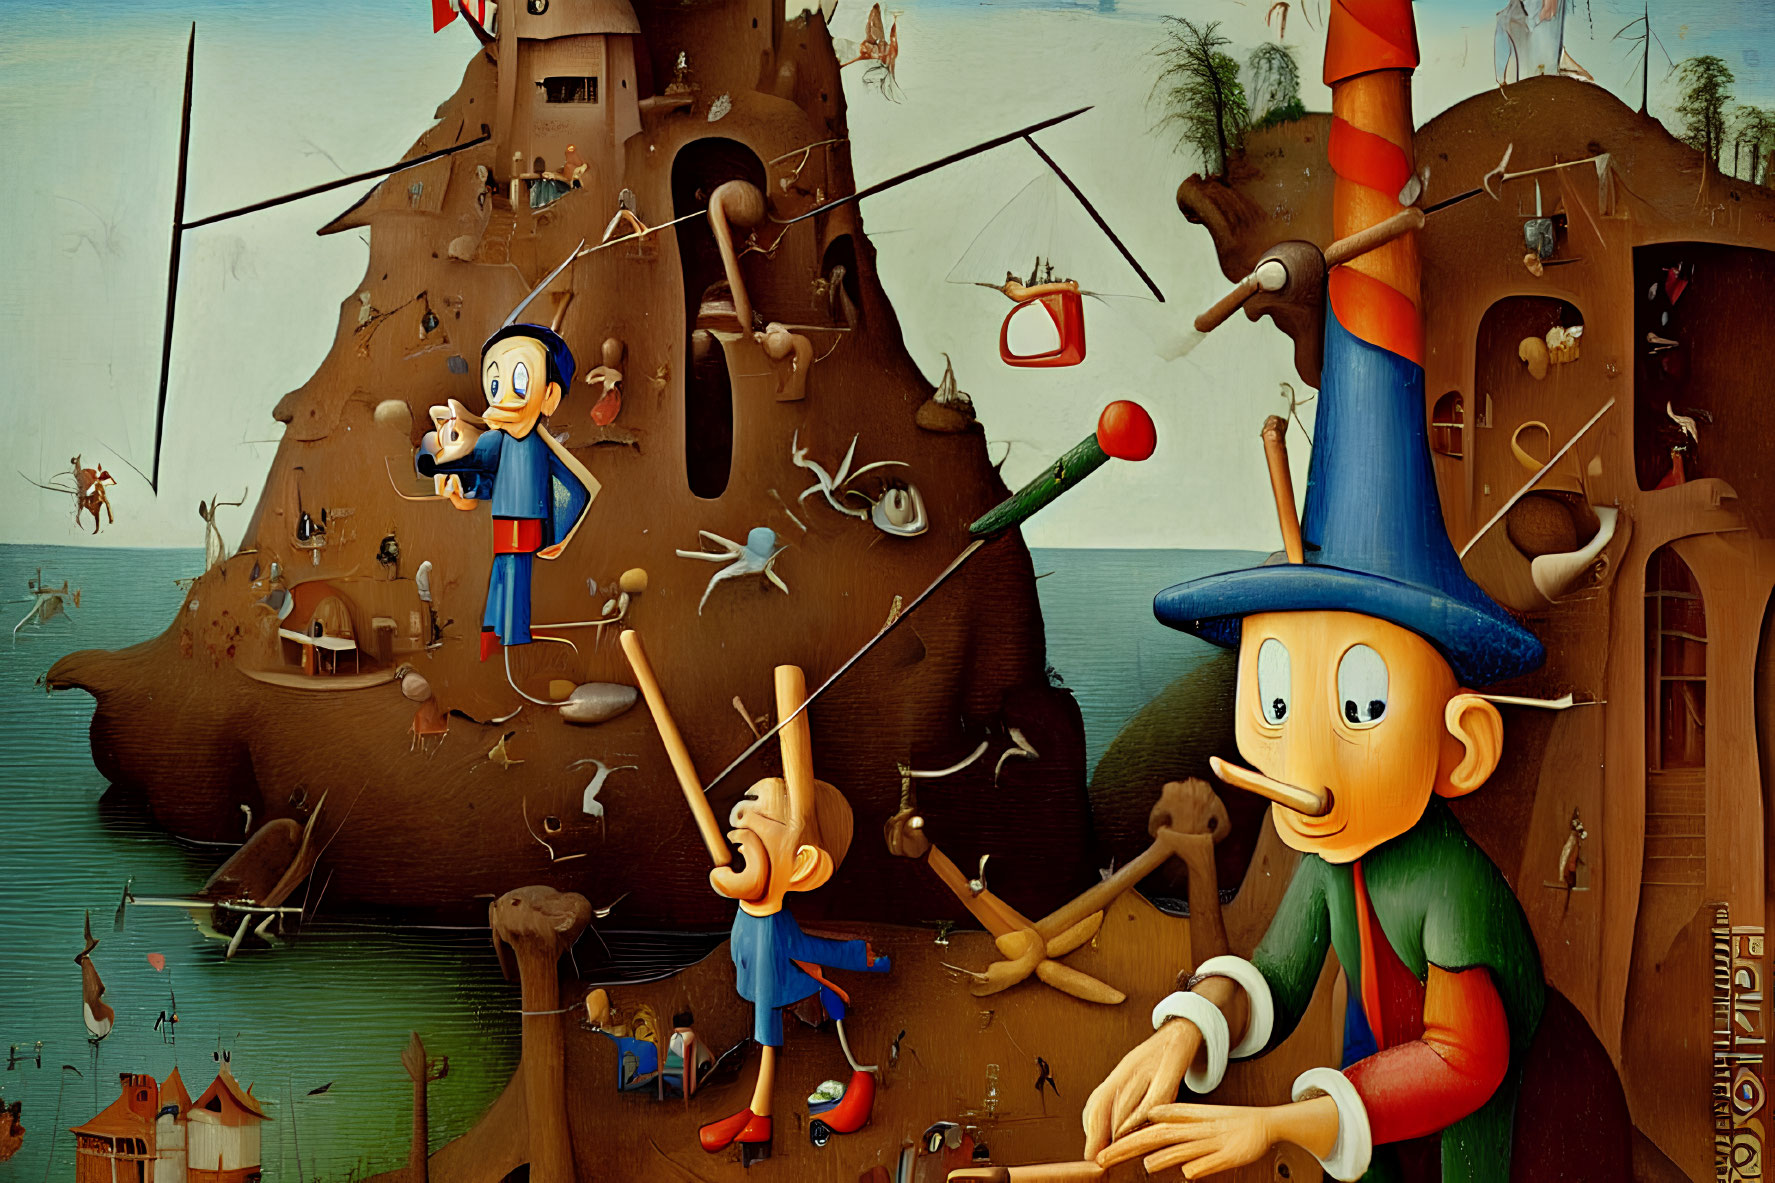 Surreal painting of whimsical figures in a bizarre landscape